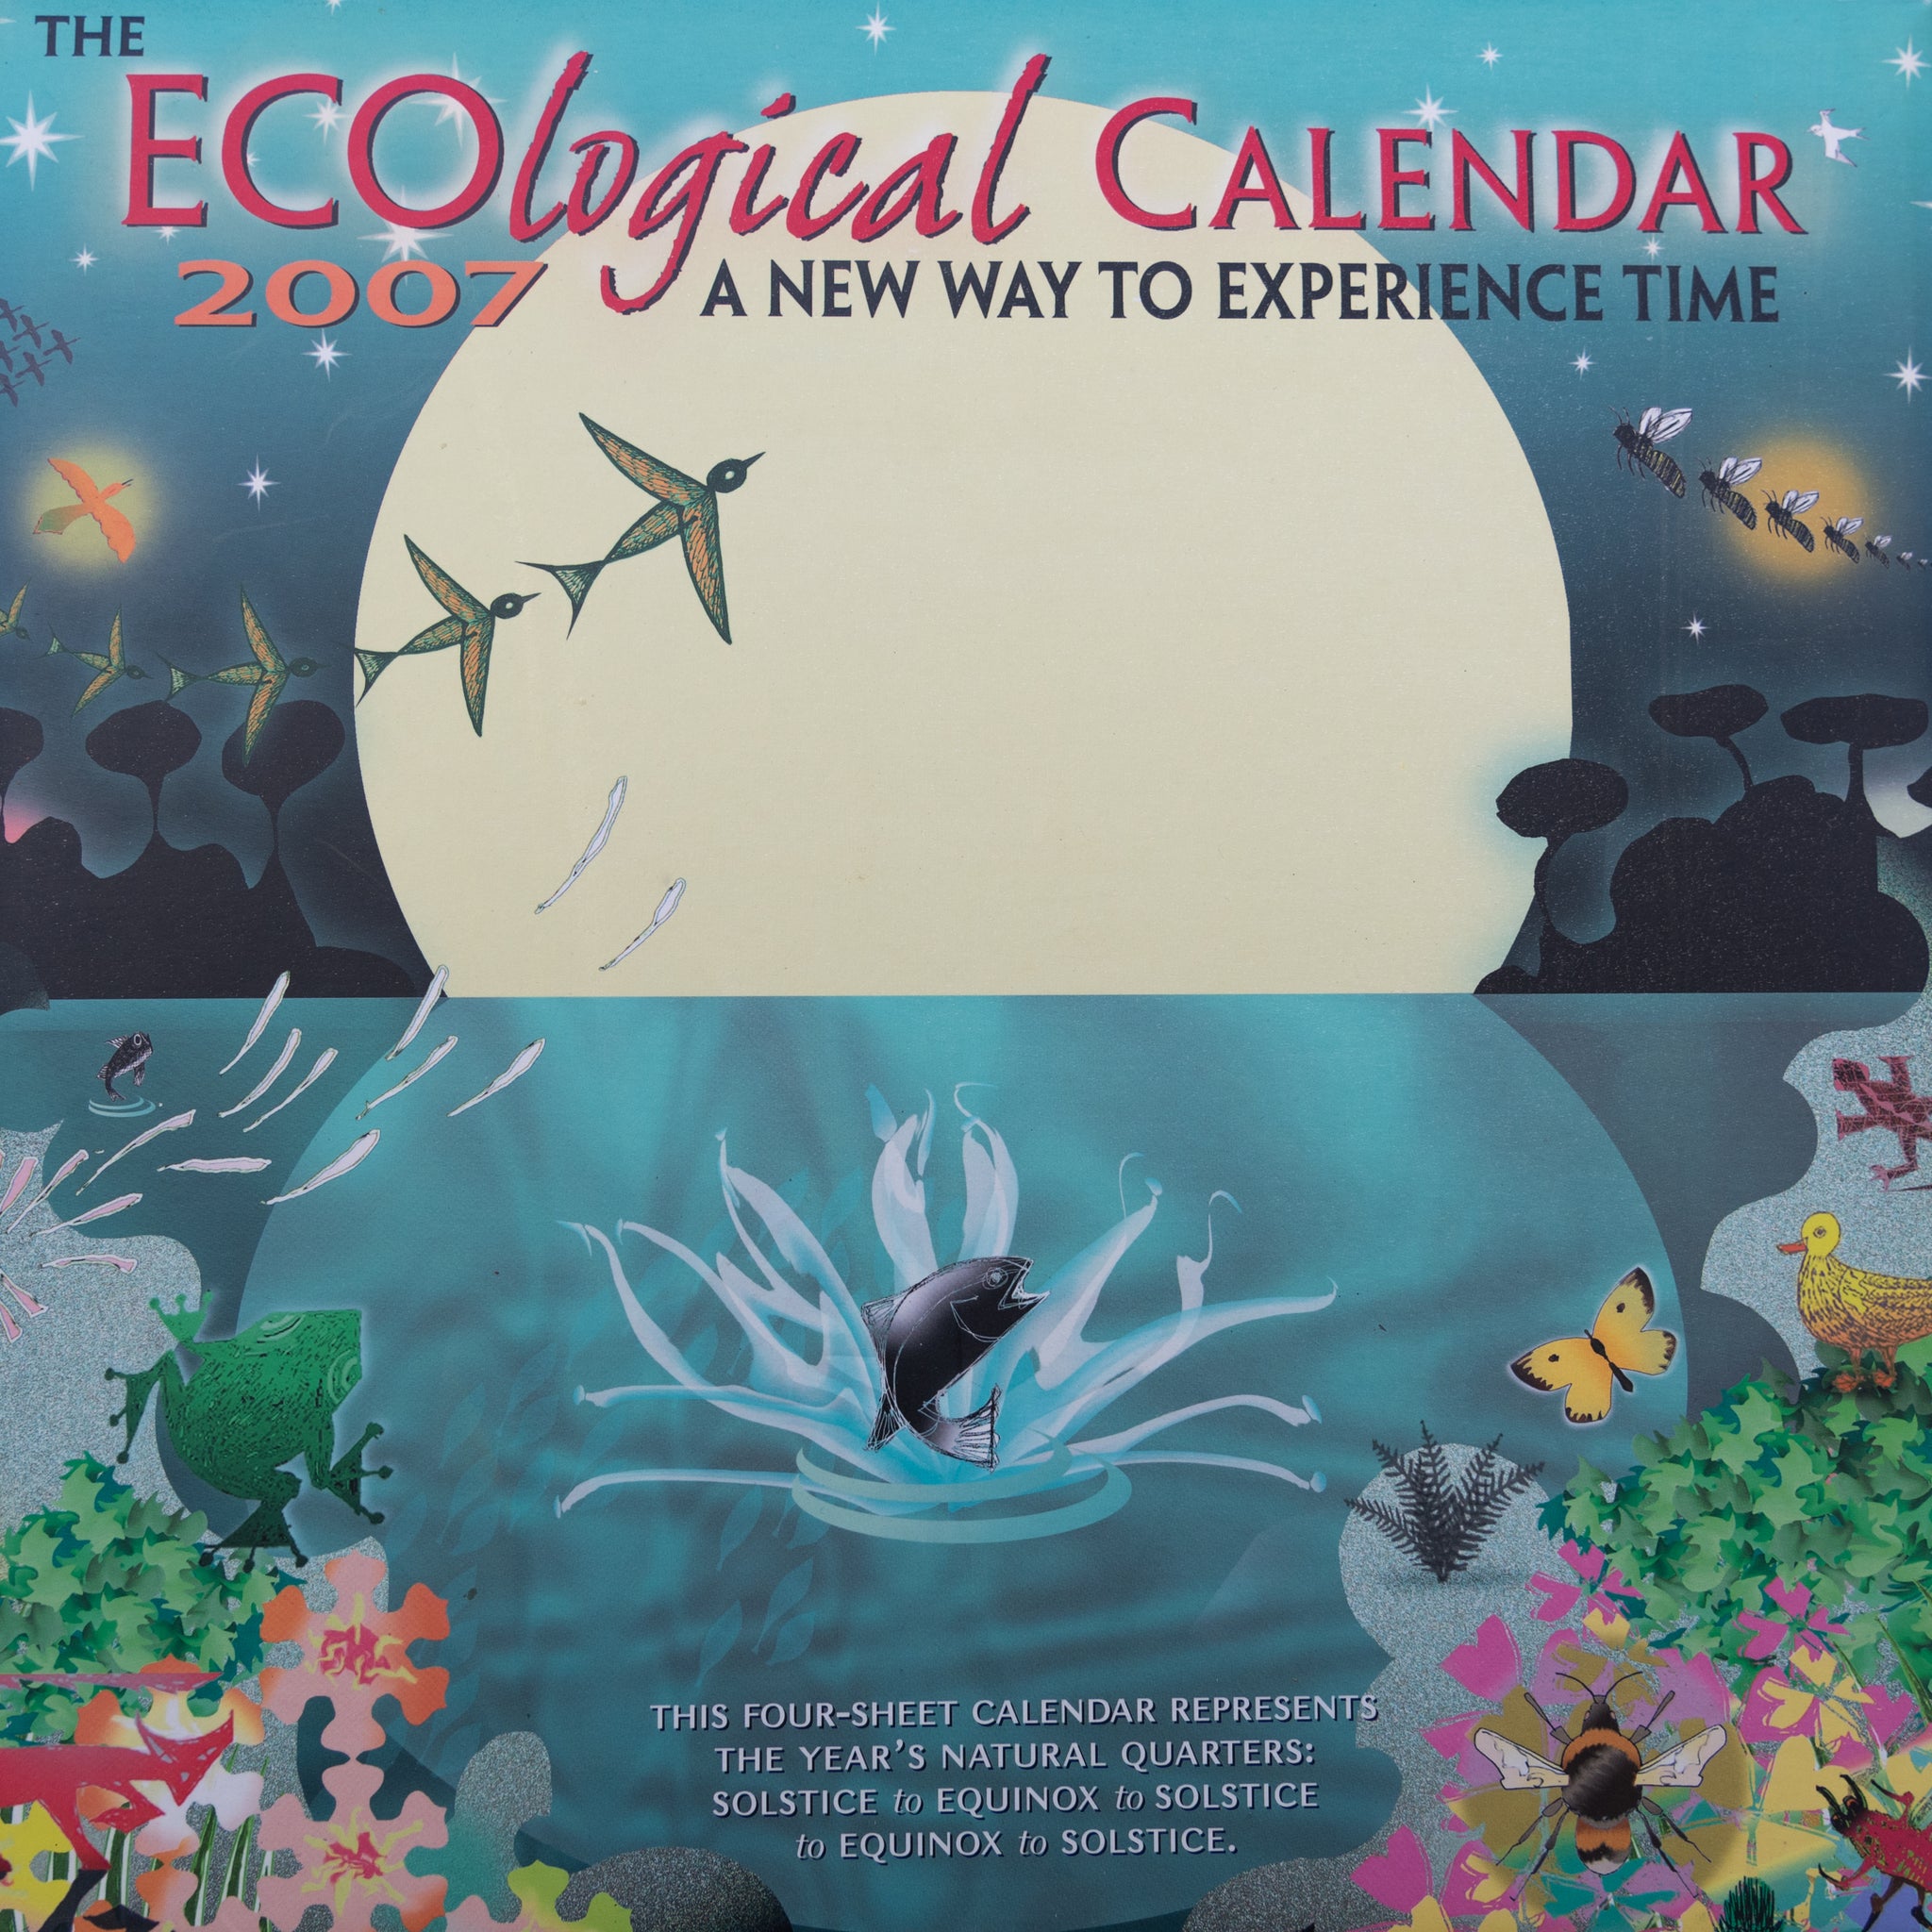 SOLD OUT!! Complete set of All ECOlogical Calendars 2005 2021, FREE S